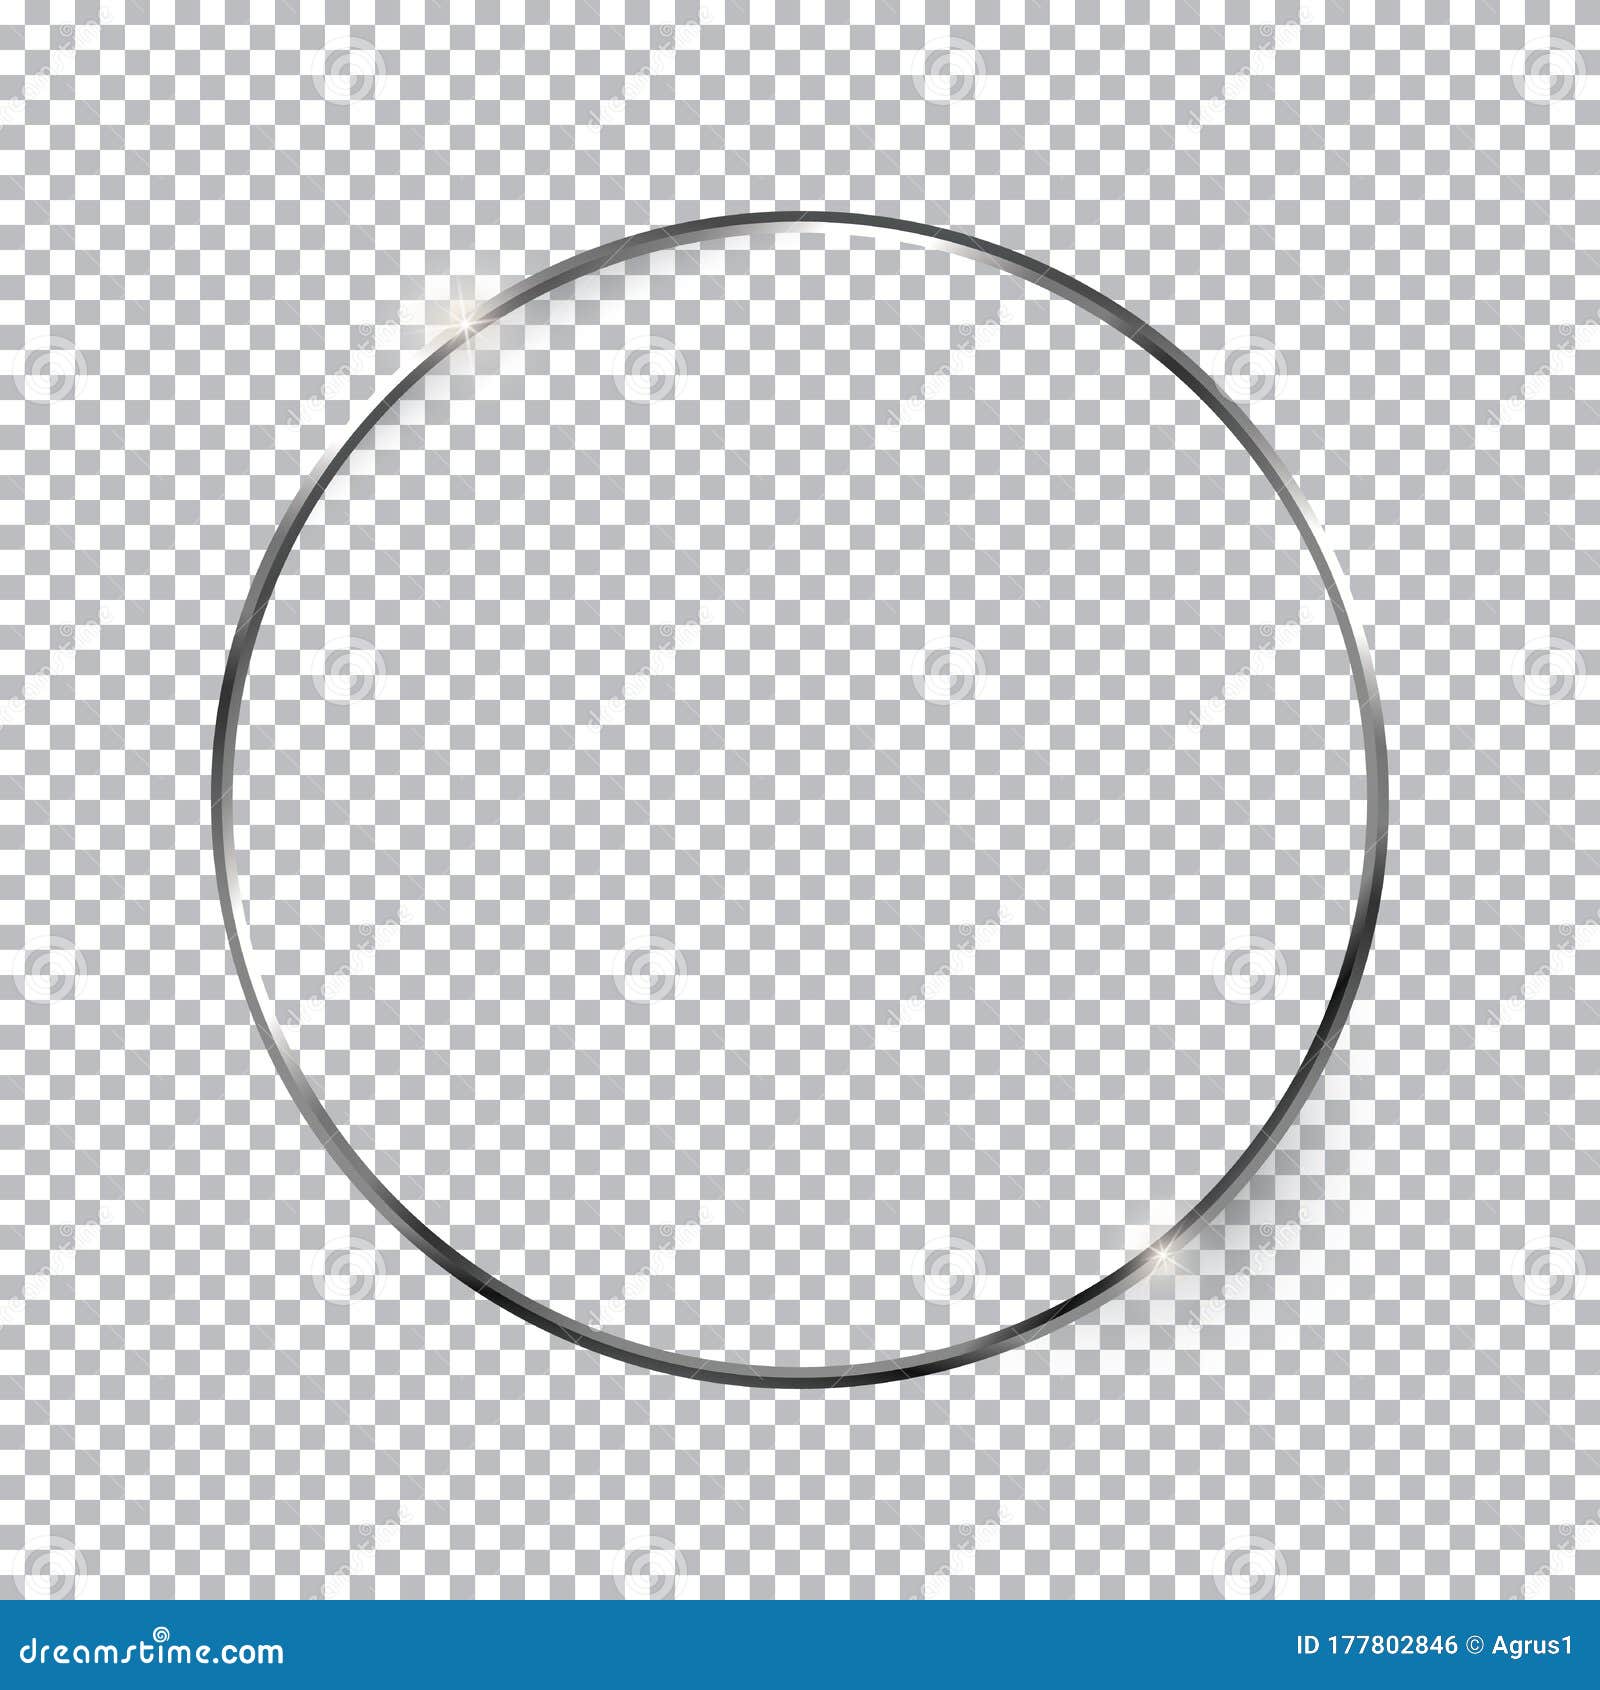 Silver Round Frame on Transparent Background Stock Vector ...